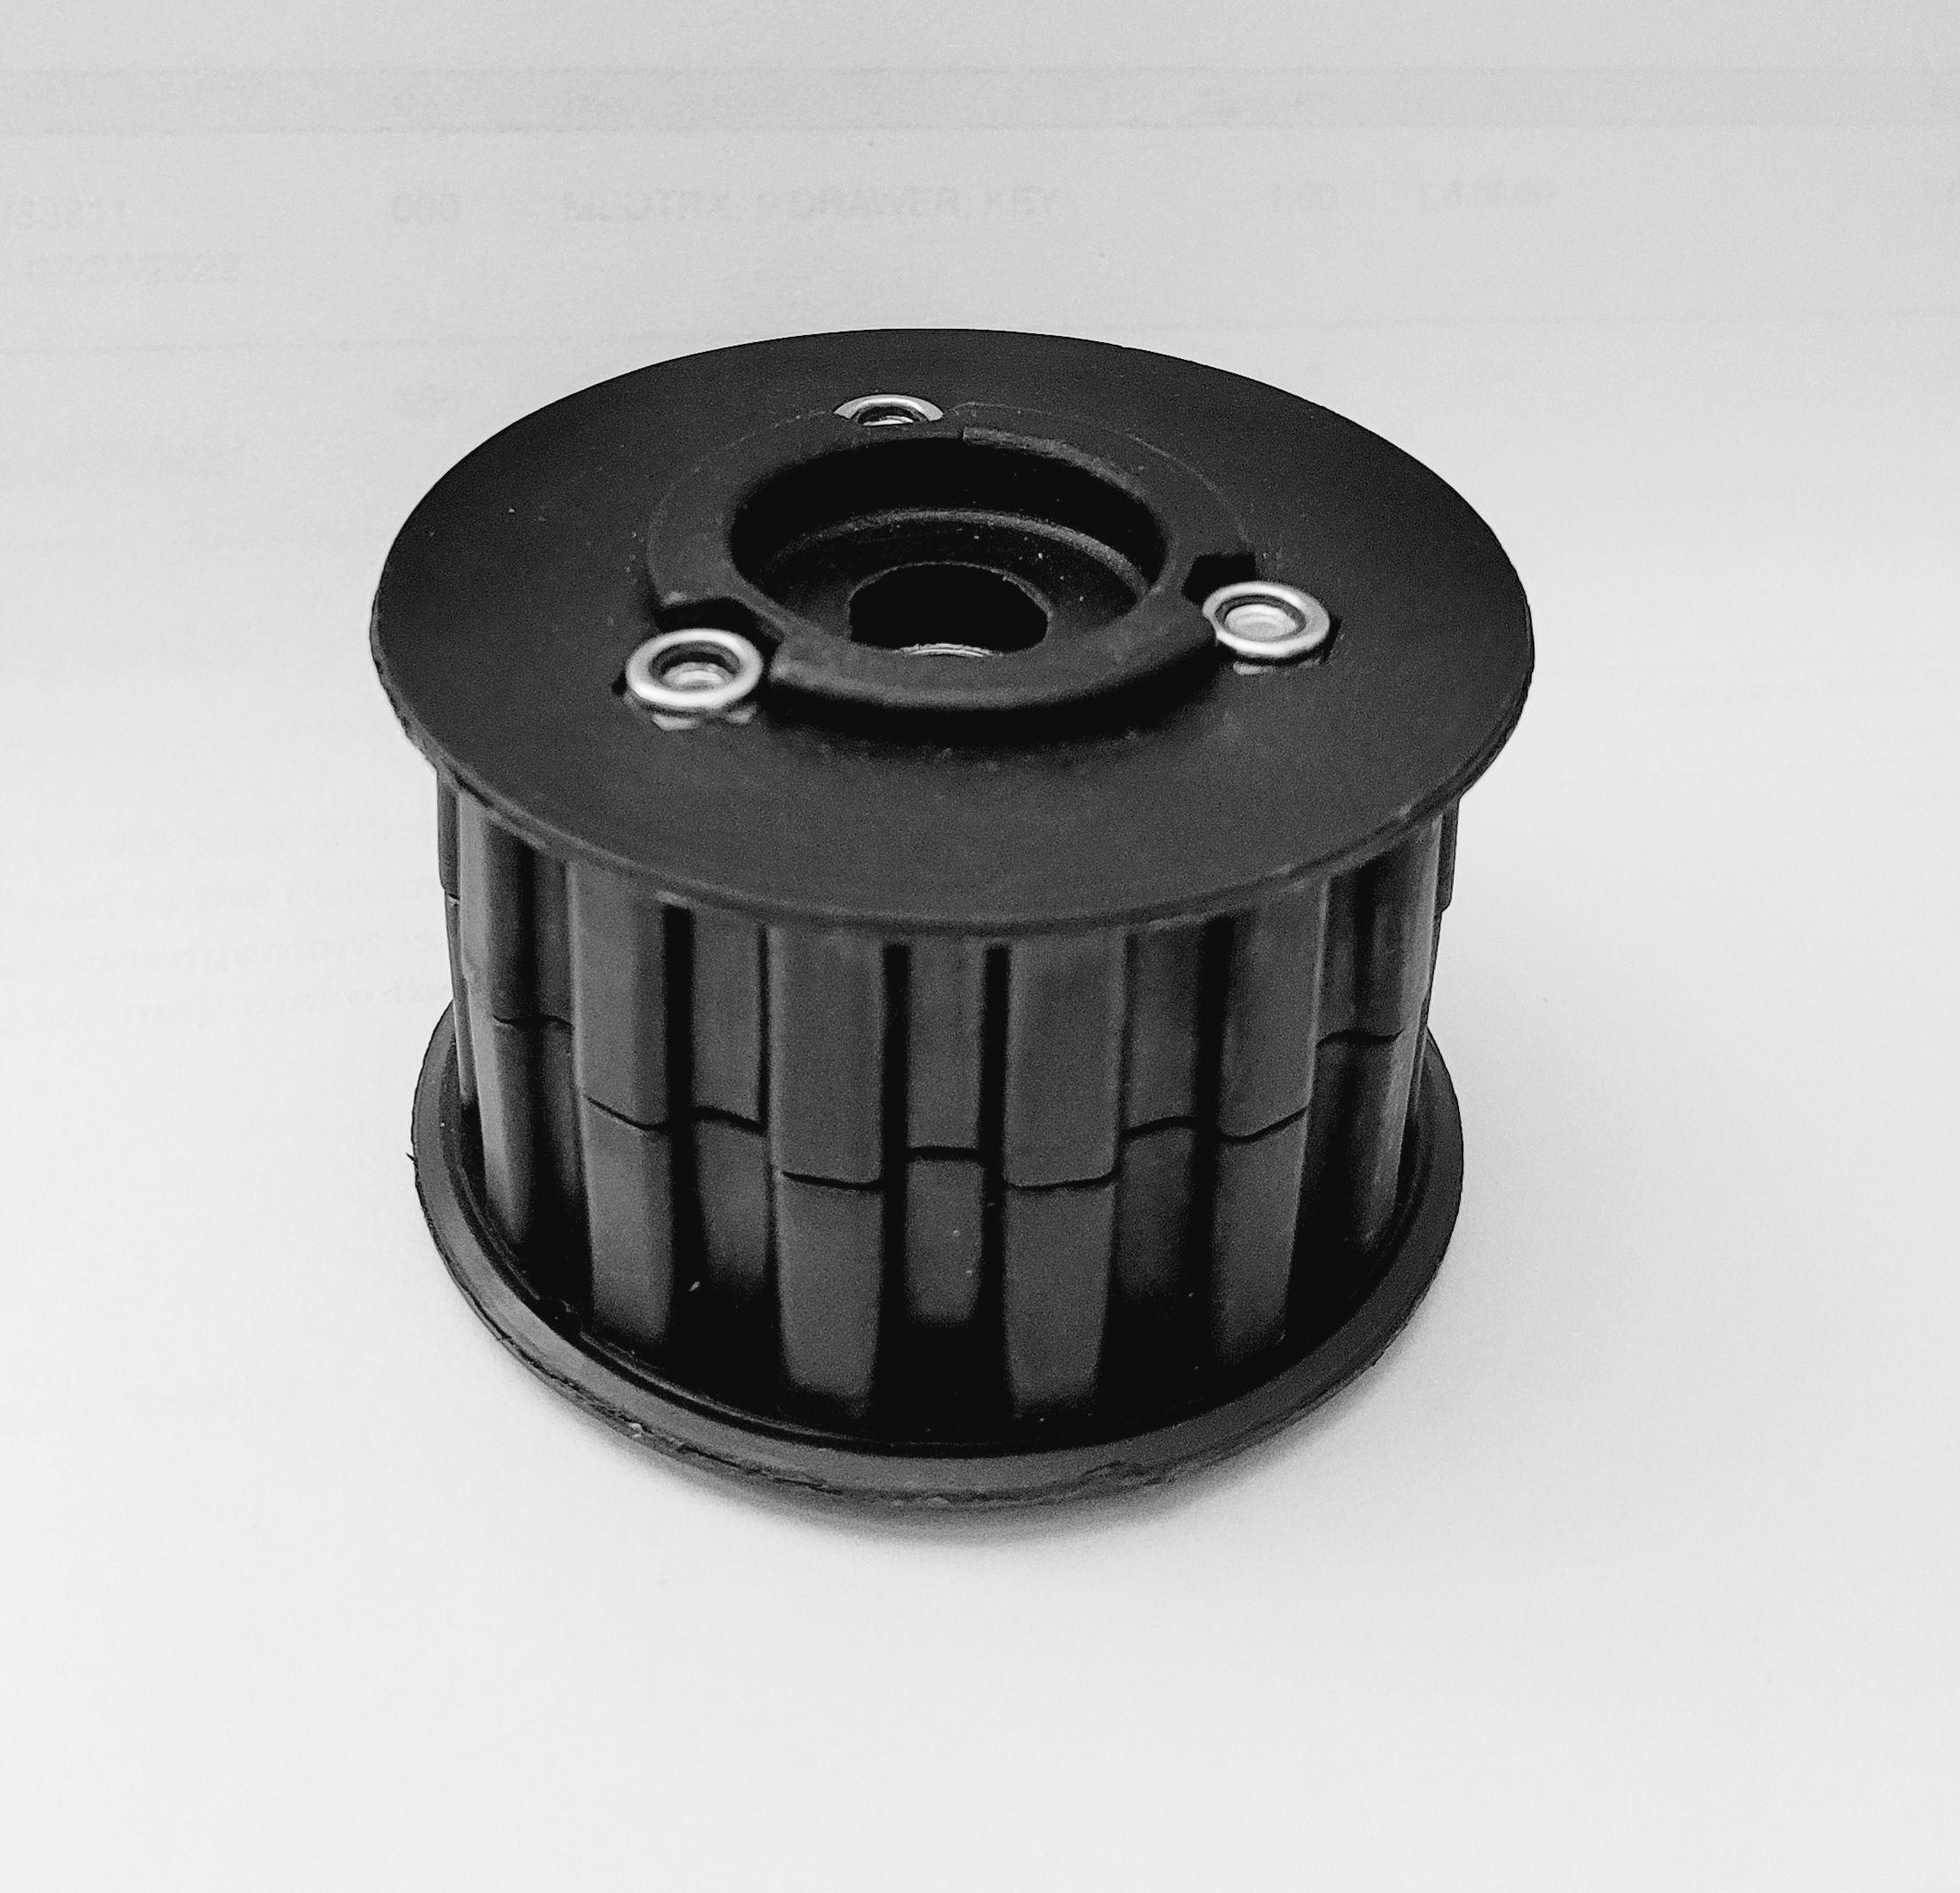 Replacement Track Wheel Gear for Stair Chairs